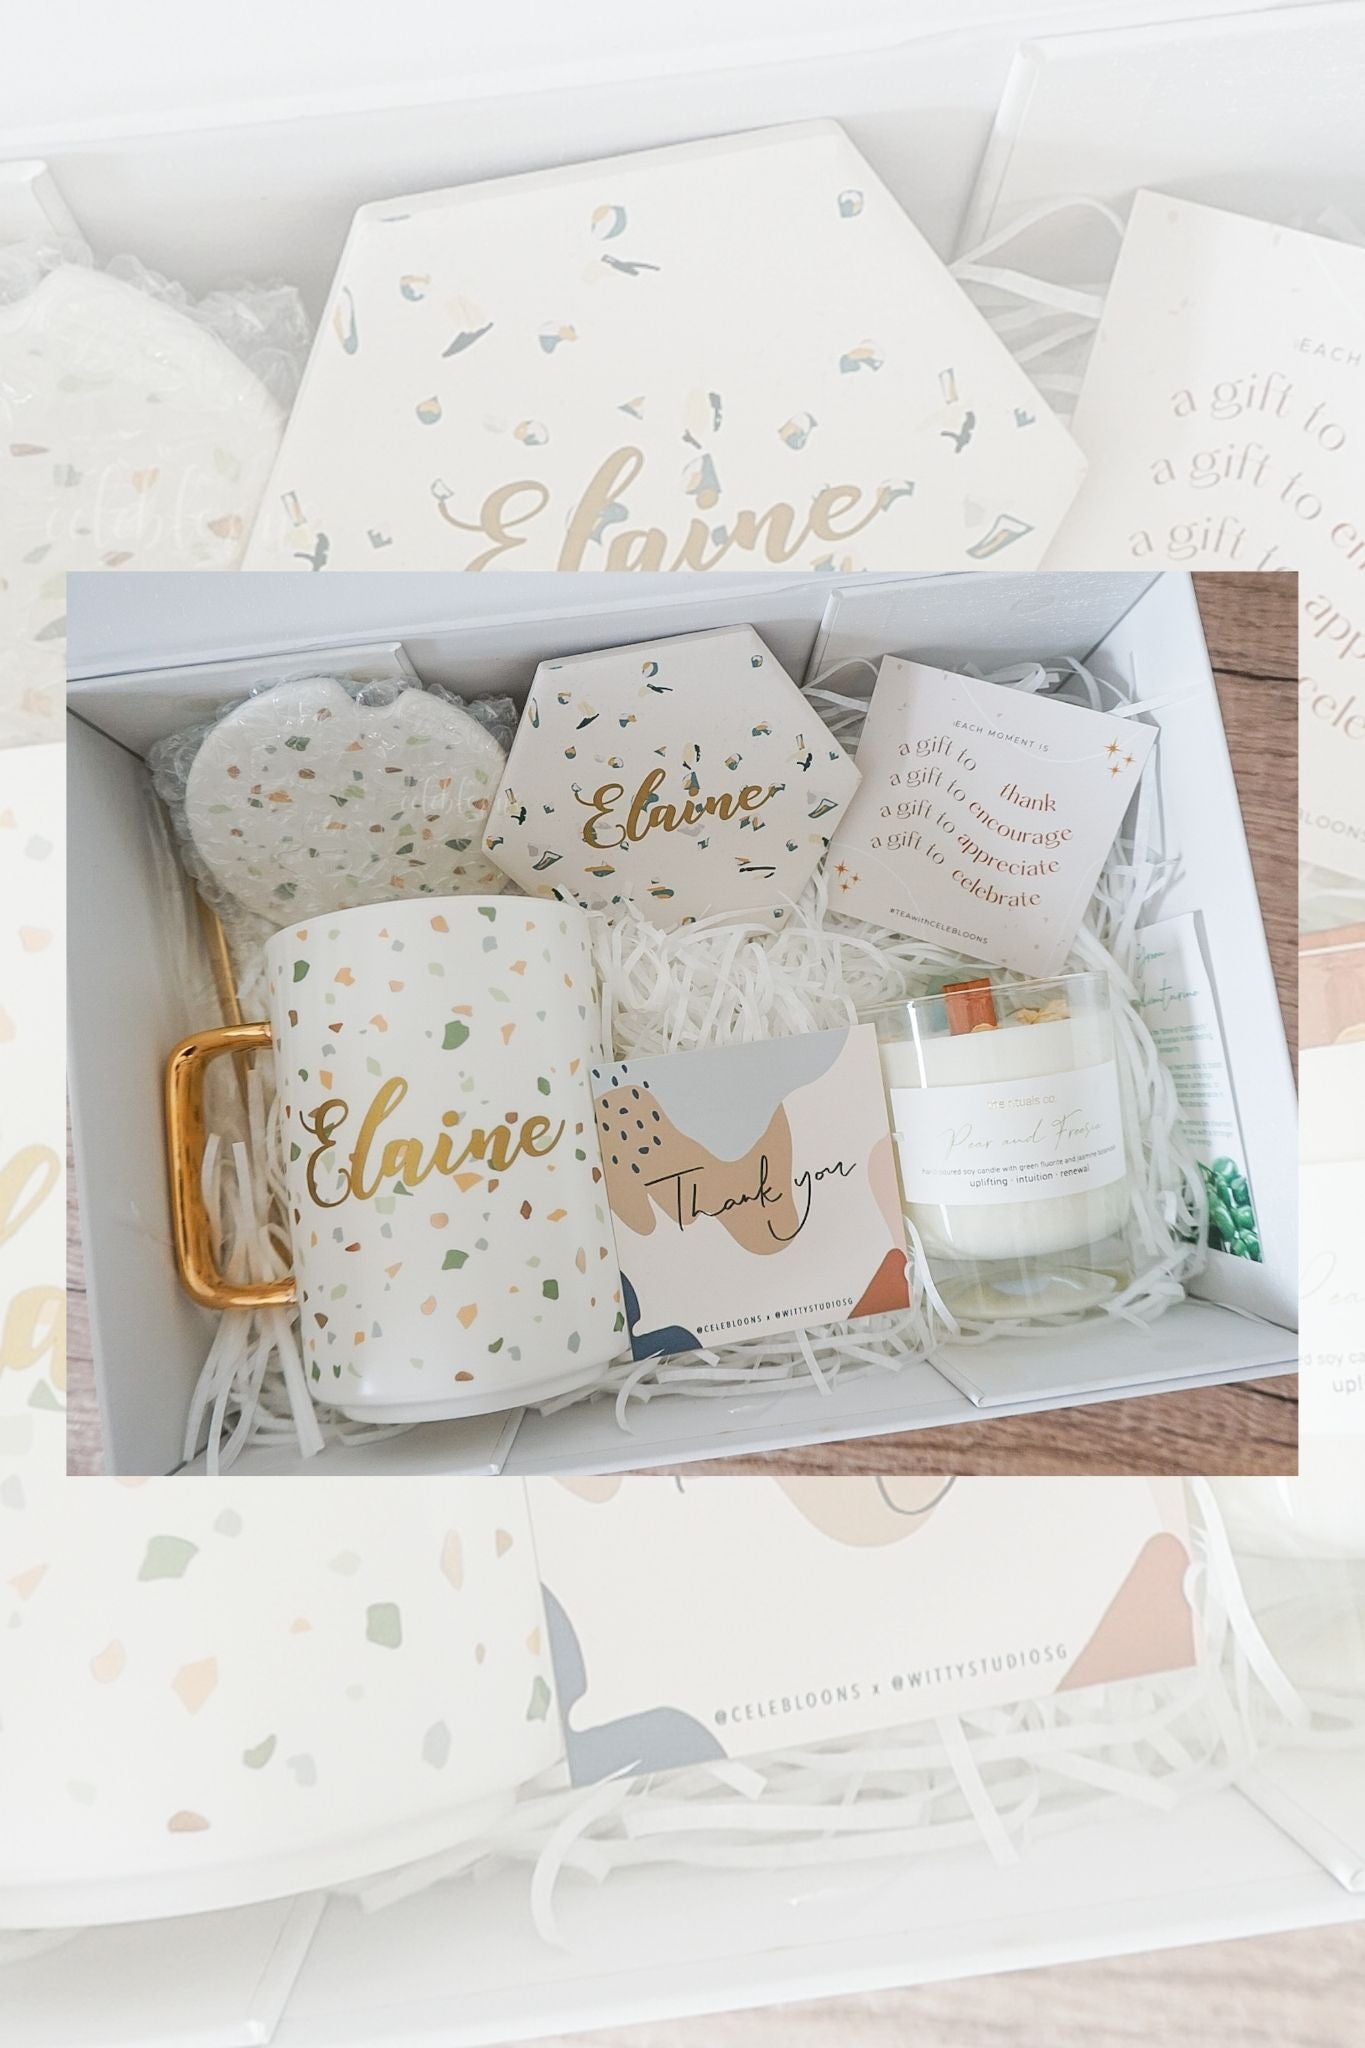 "Your Slice of Tranquility" Customised Giftset